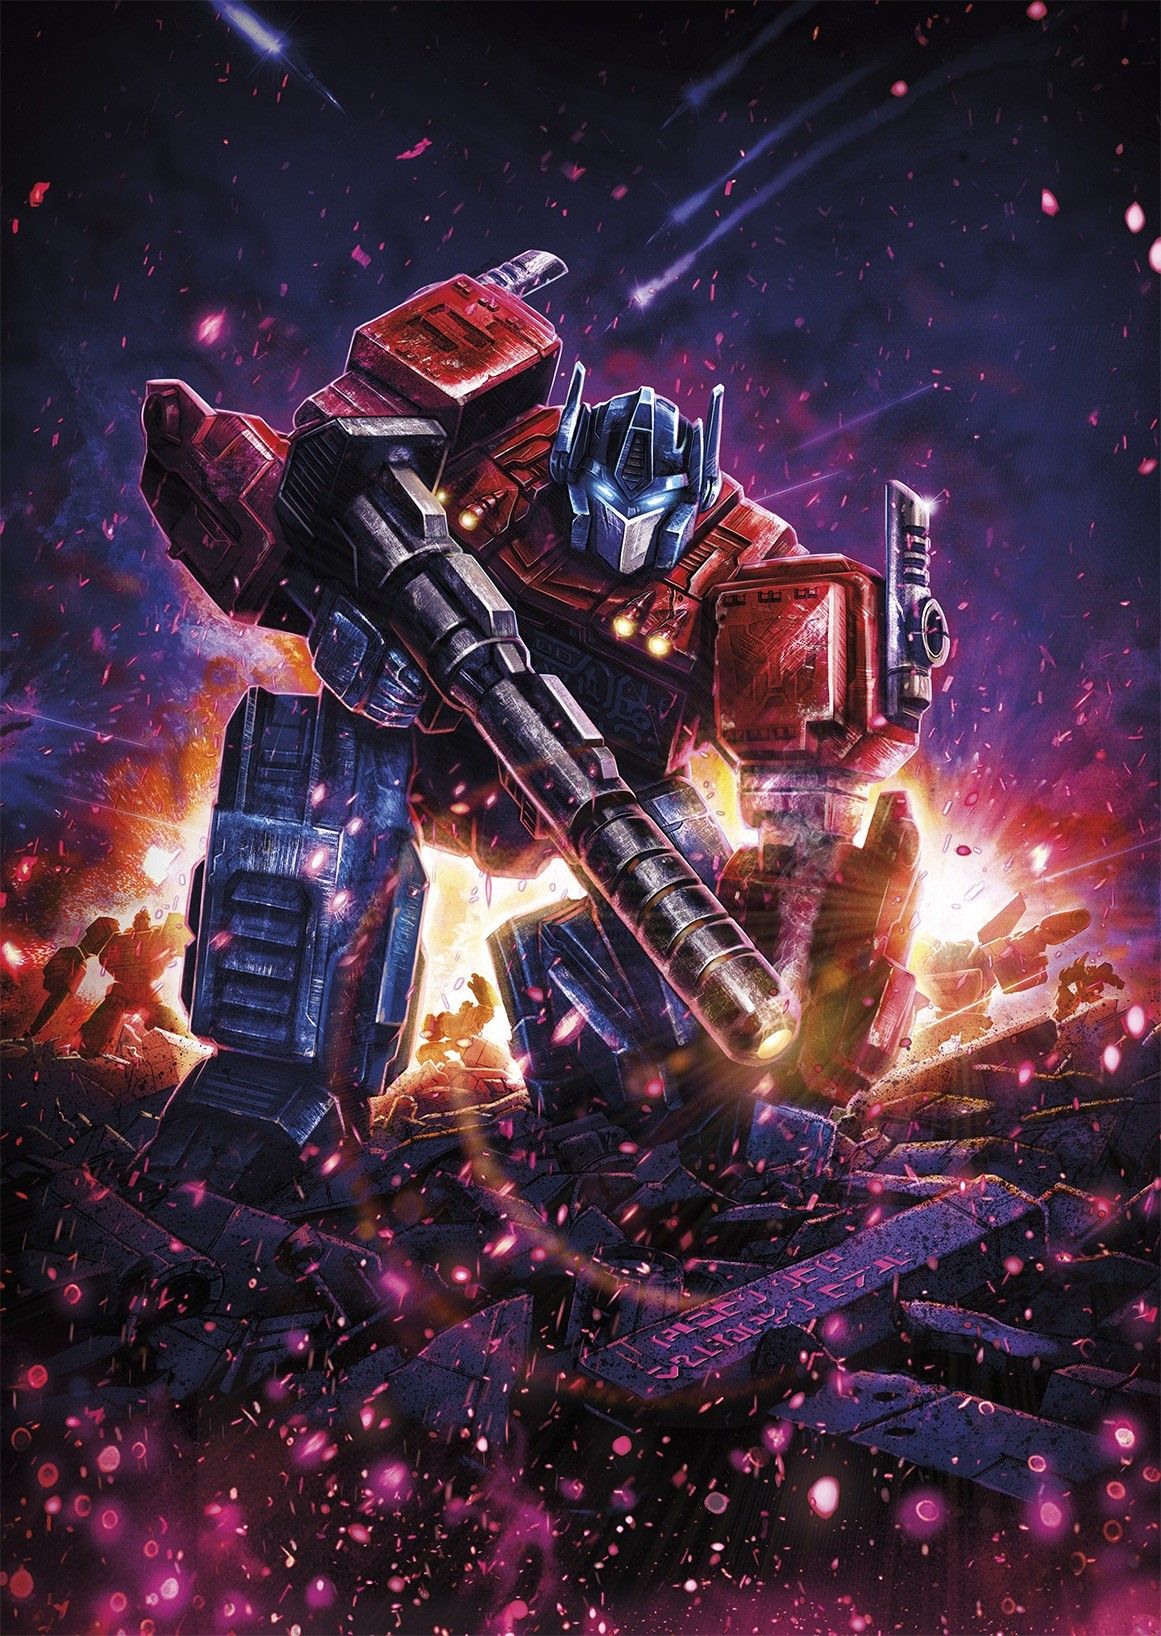 Anyone Able to Translate the Cybertronian on the New WFC Optimus' Promo Art?